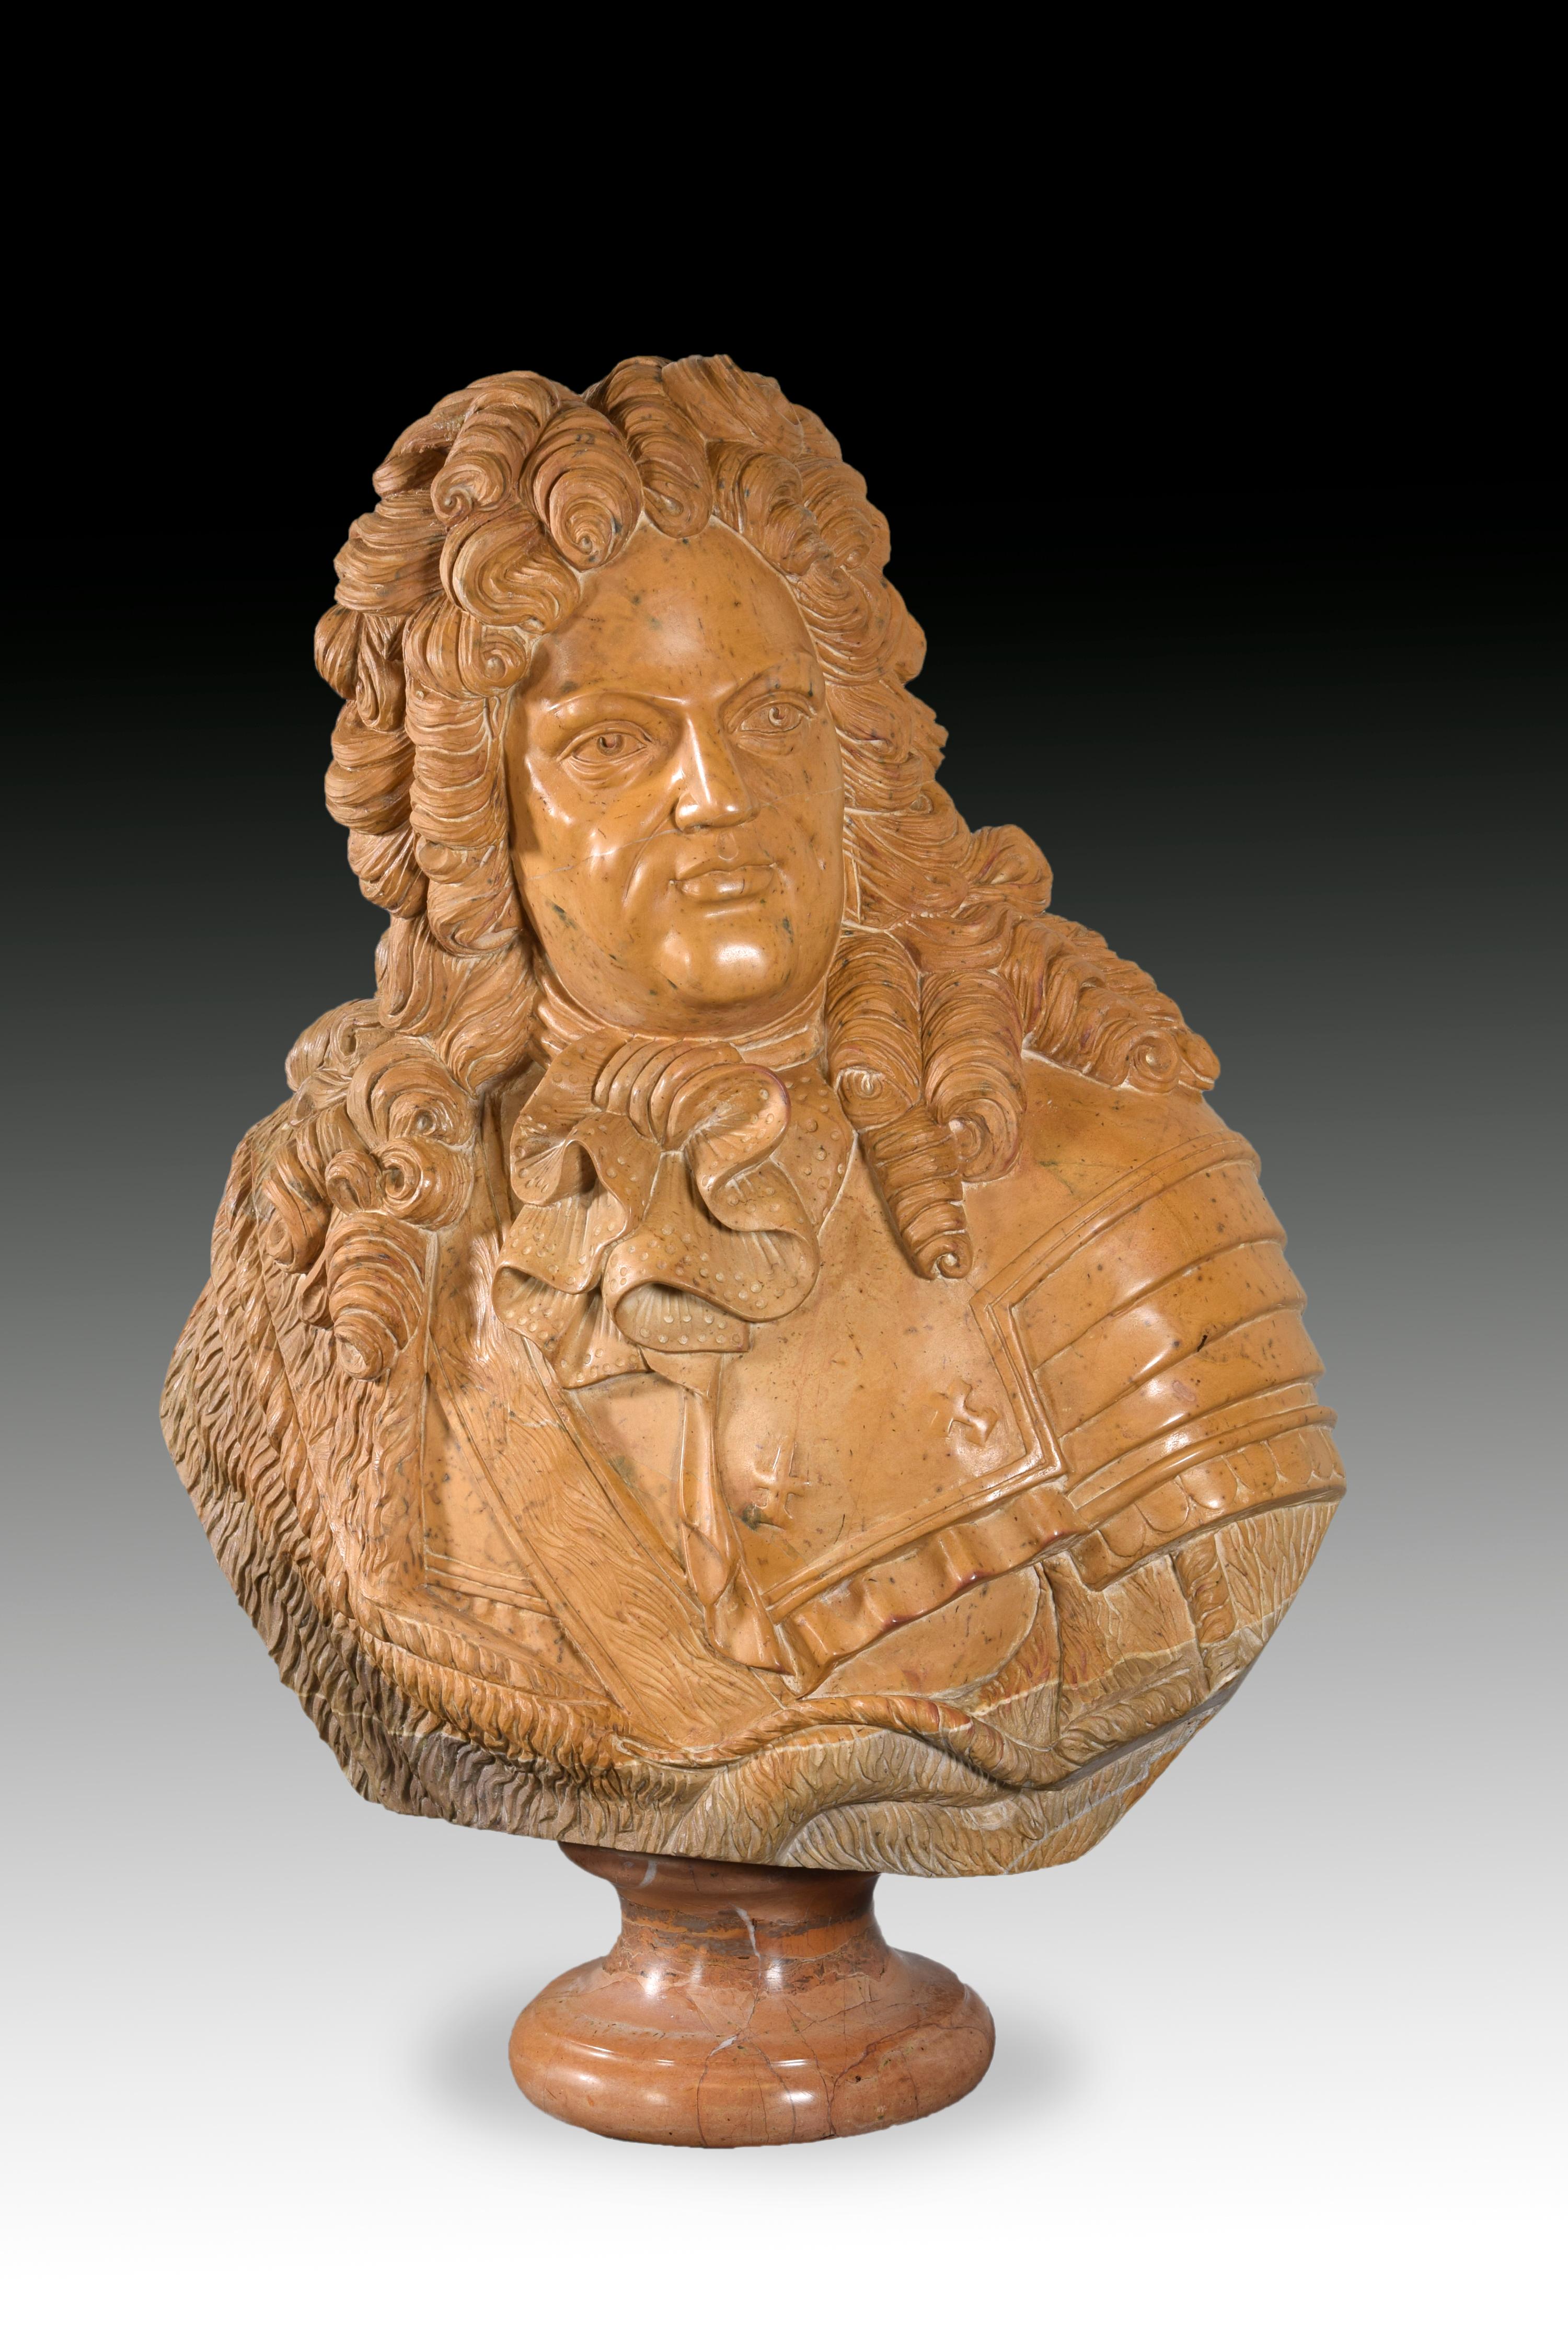 The gentleman appears dressed in armor and headdress with long curly wig. The idealization, clothing and posture refer to examples of busts made in the environment of the court of Louis XIV (17101774) by artists such as Antoine Coysevox, JeanAntoine